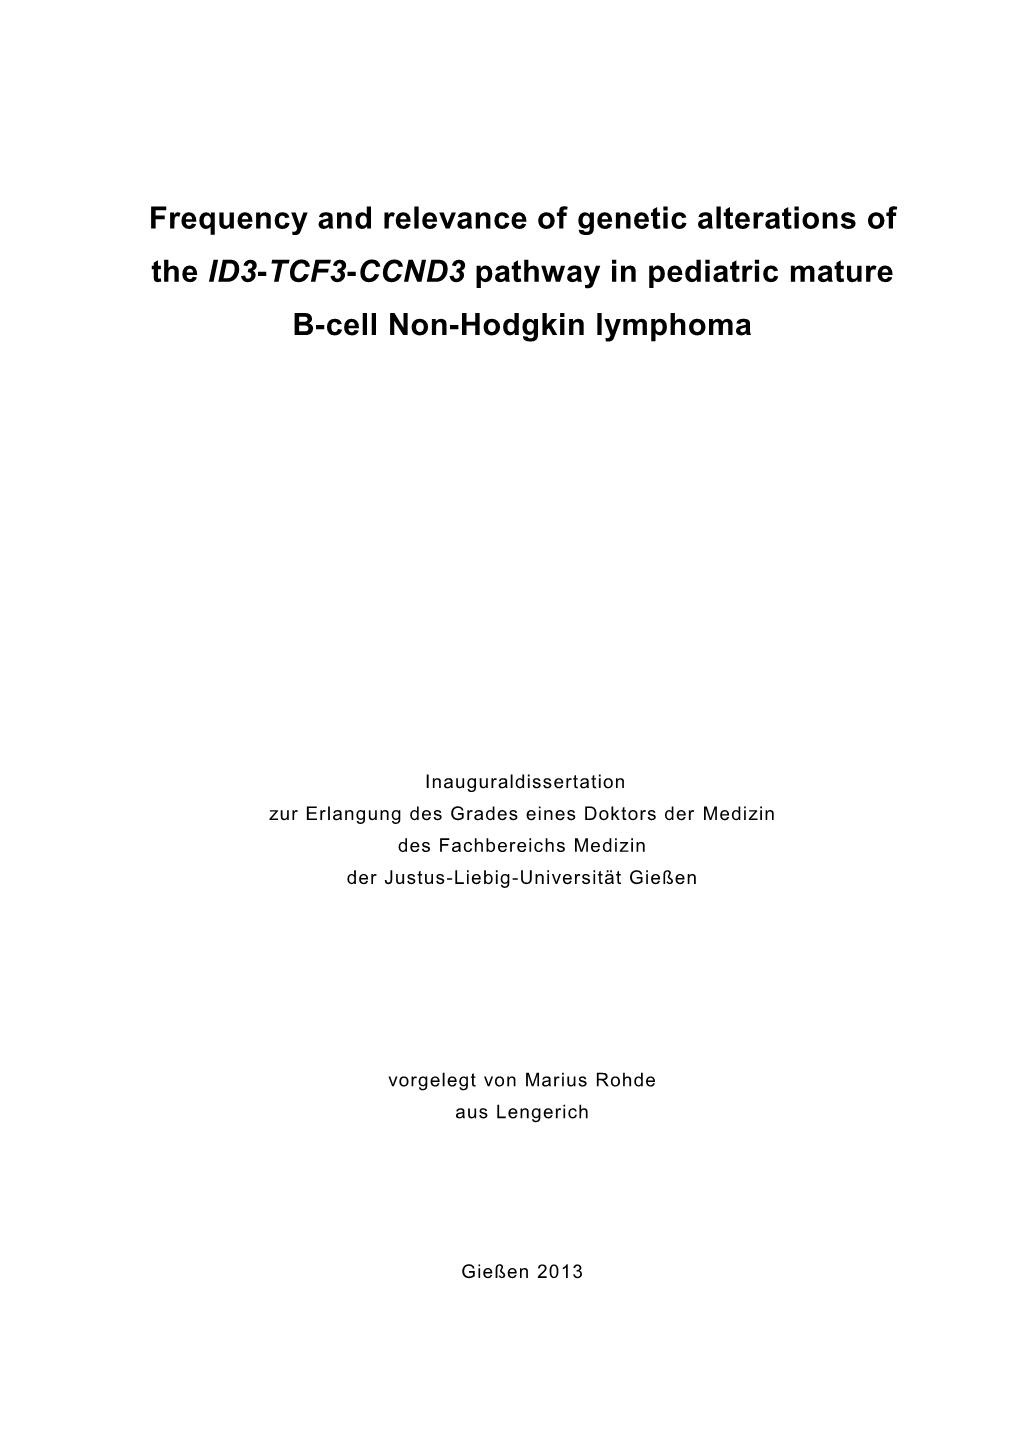 Frequency and Relevance of Genetic Alterations of the ID3-TCF3-CCND3 Pathway in Pediatric Mature B-Cell Non-Hodgkin Lymphoma